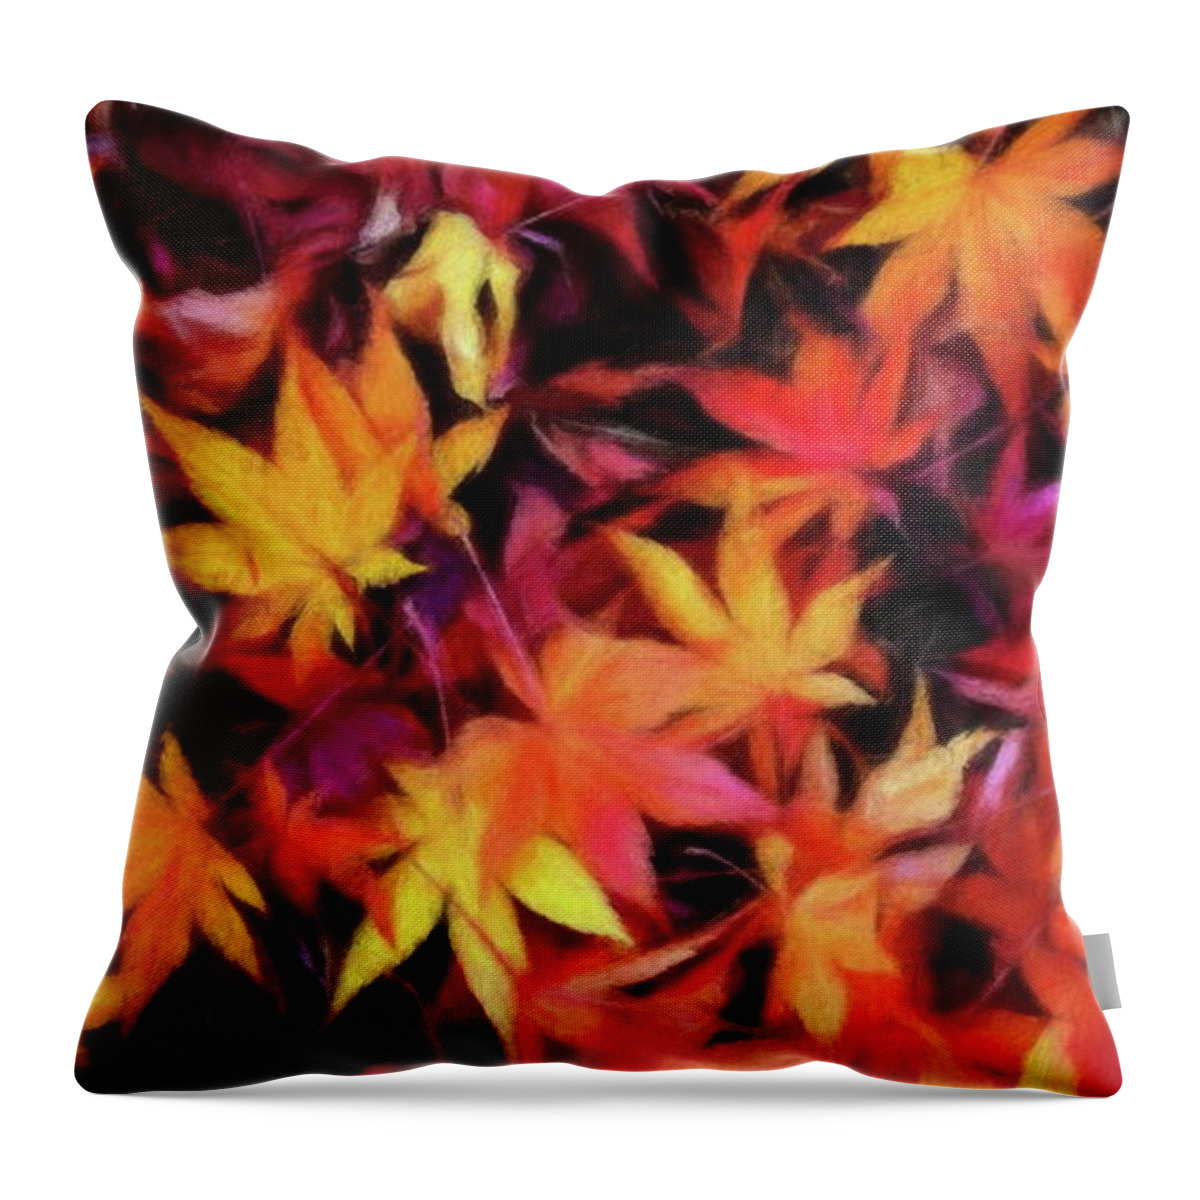 Leaves Throw Pillow featuring the digital art Autumn by Russ Harris